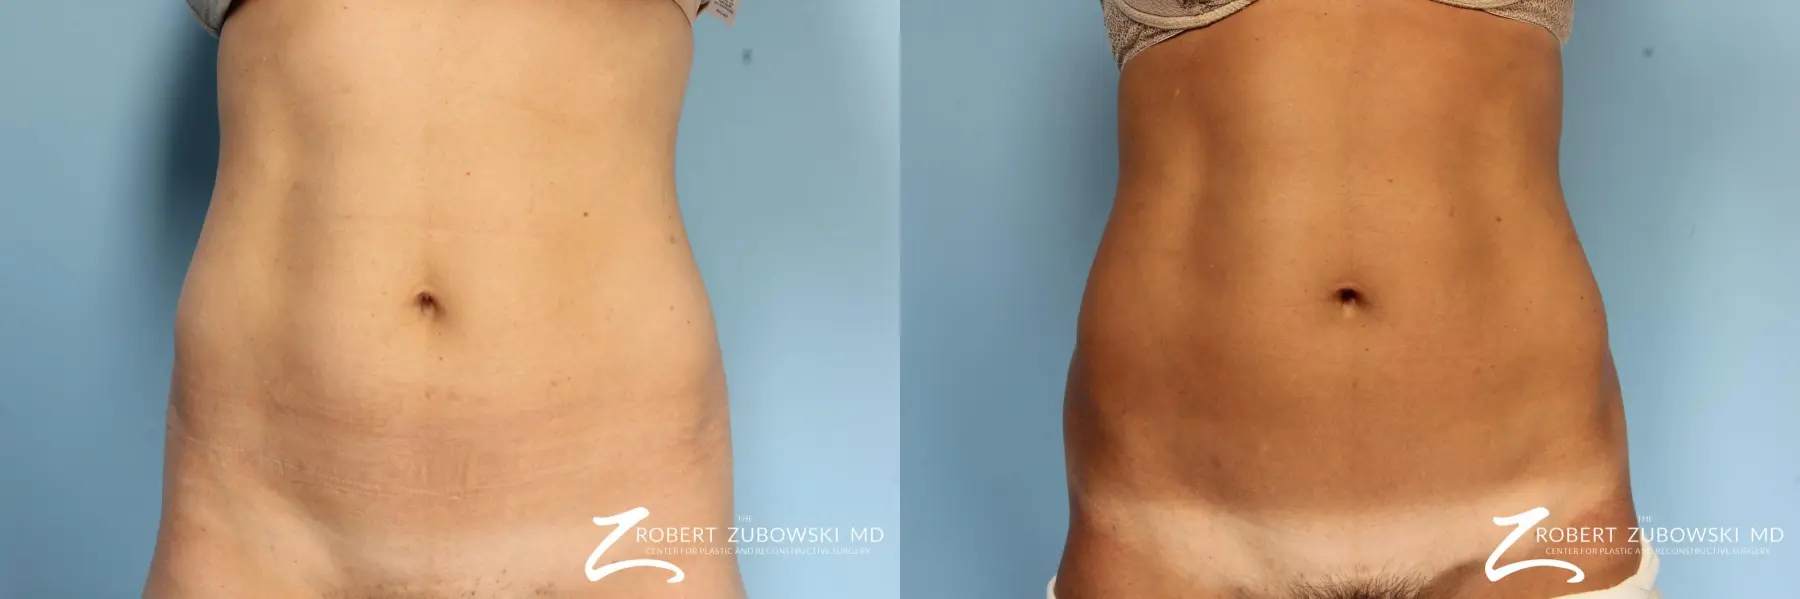 CoolSculpting®: Patient 4 - Before and After 1